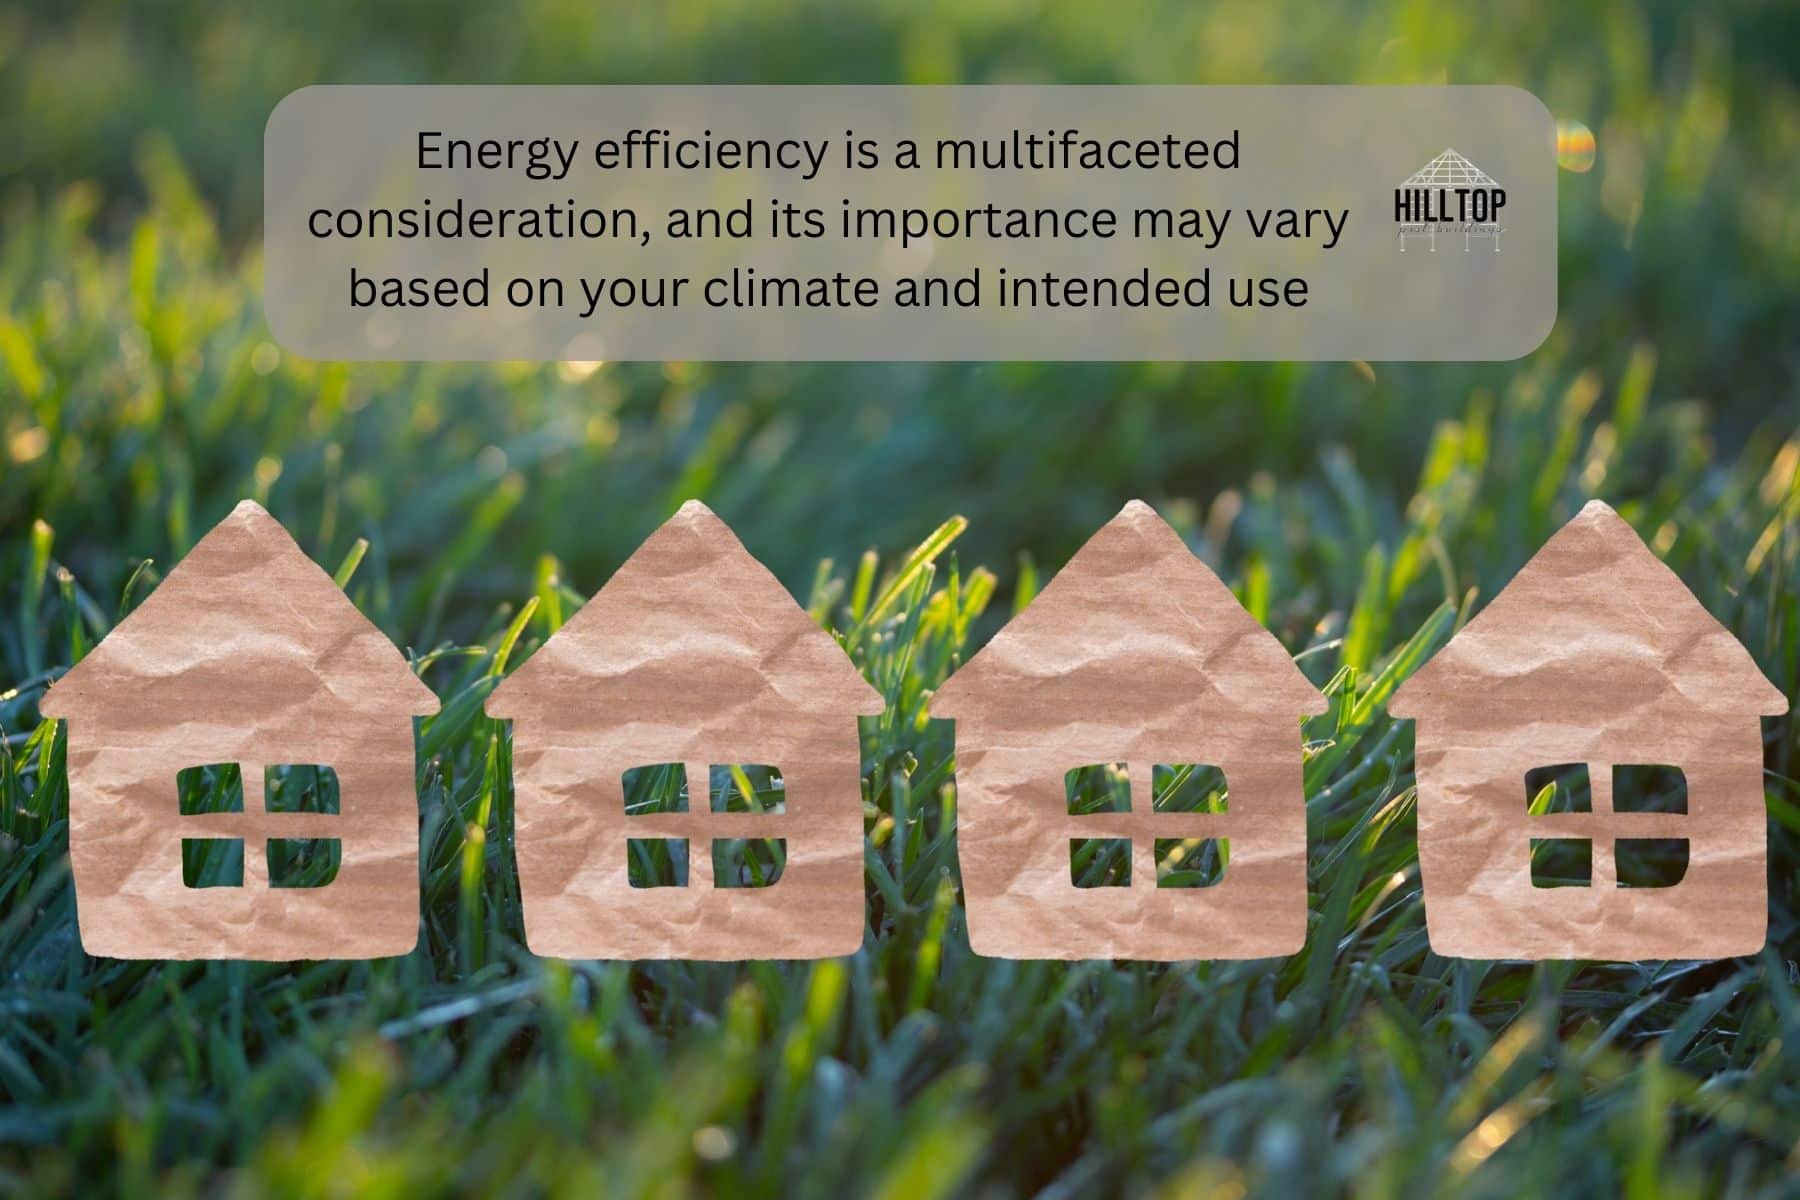 Energy efficiency is a multi-faceted concept that can be applied to various structures, including pole barns.